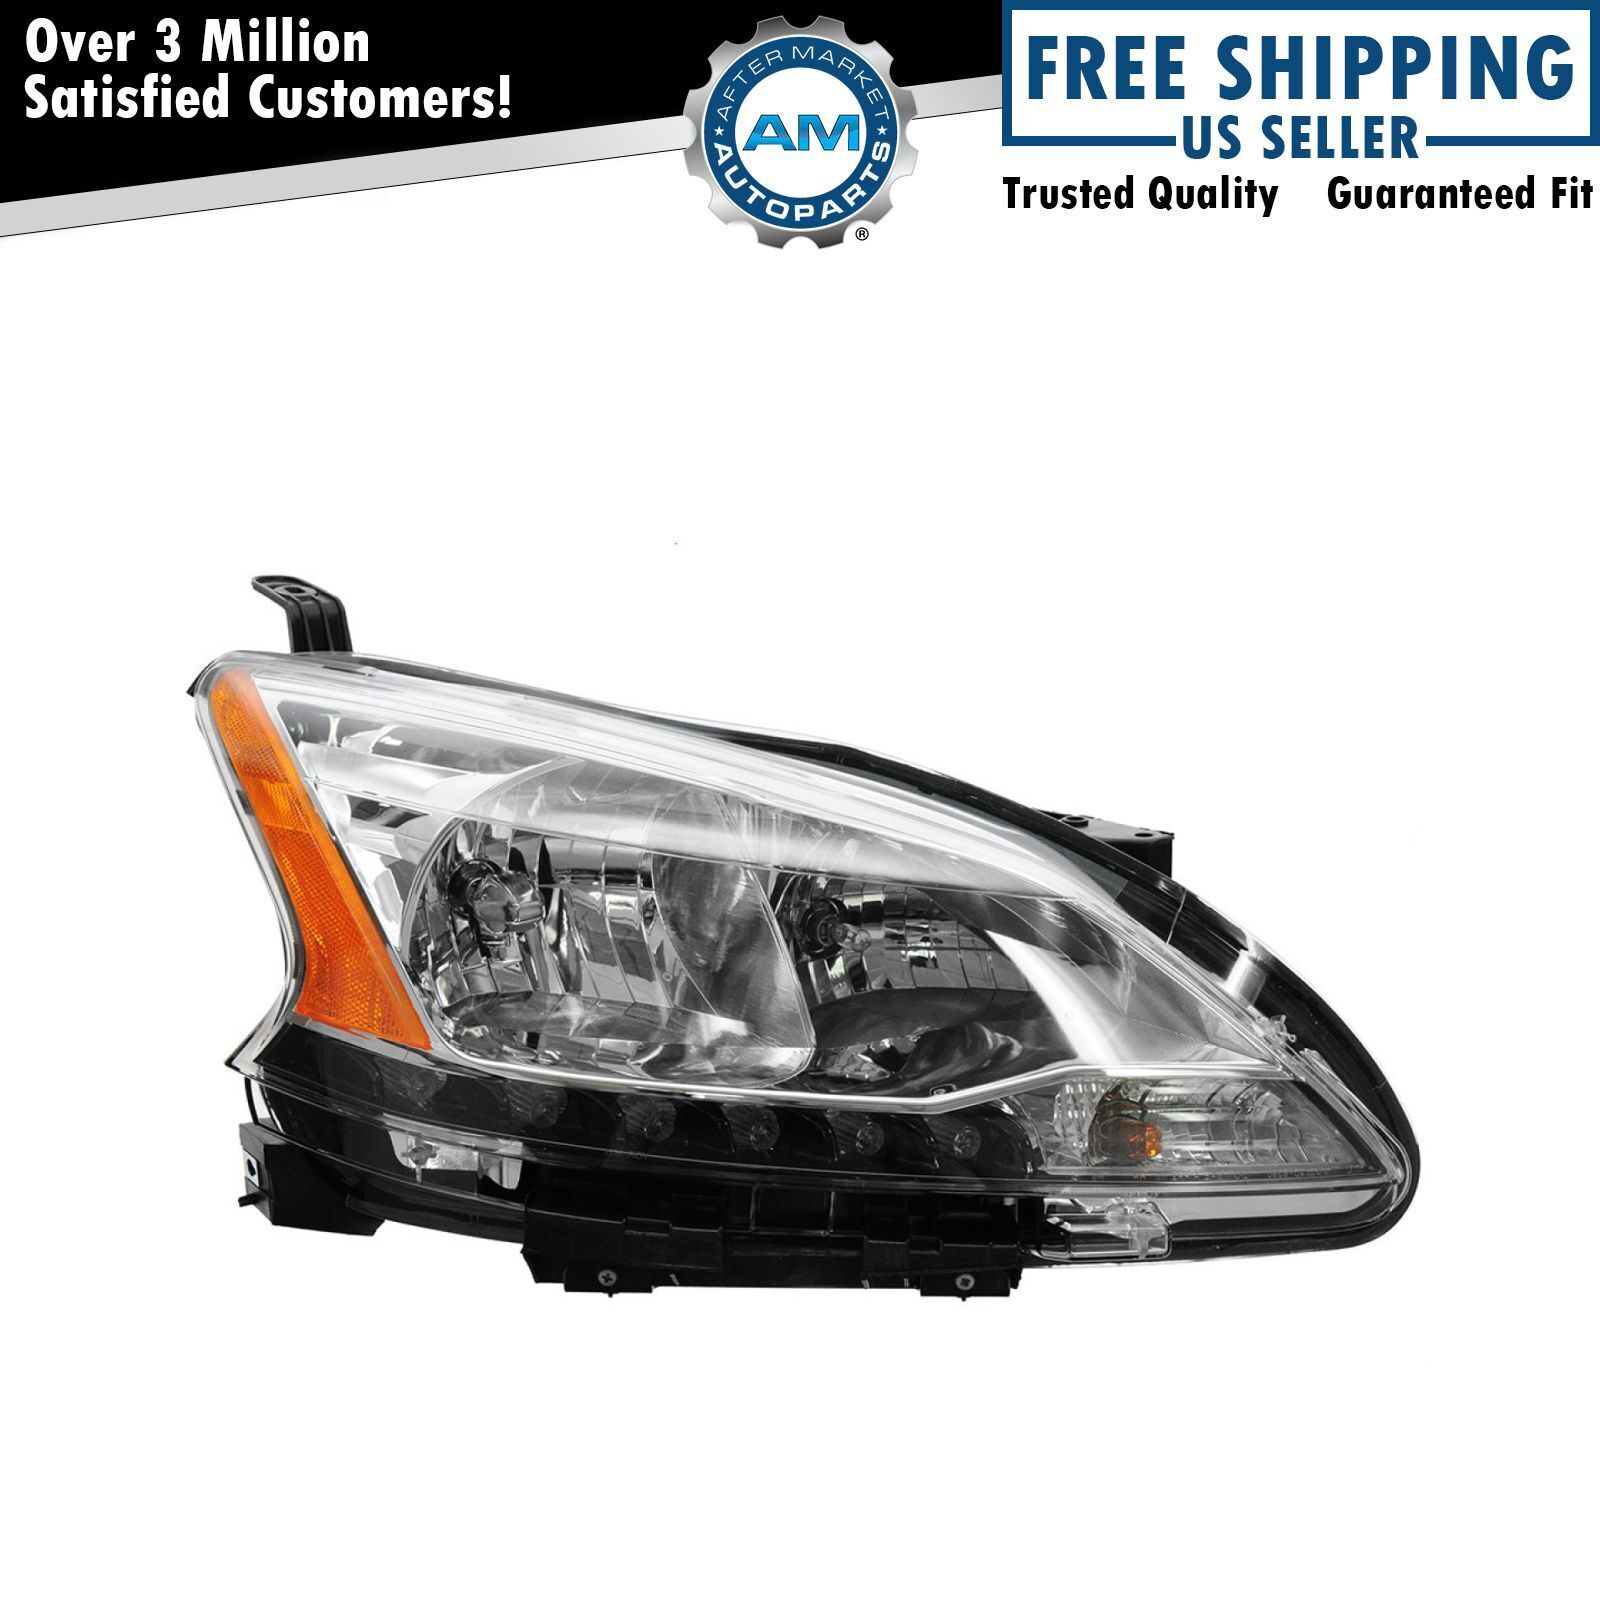 Right Headlight Assembly Passenger Side For 2013-2015 Nissan Sentra NI2503216